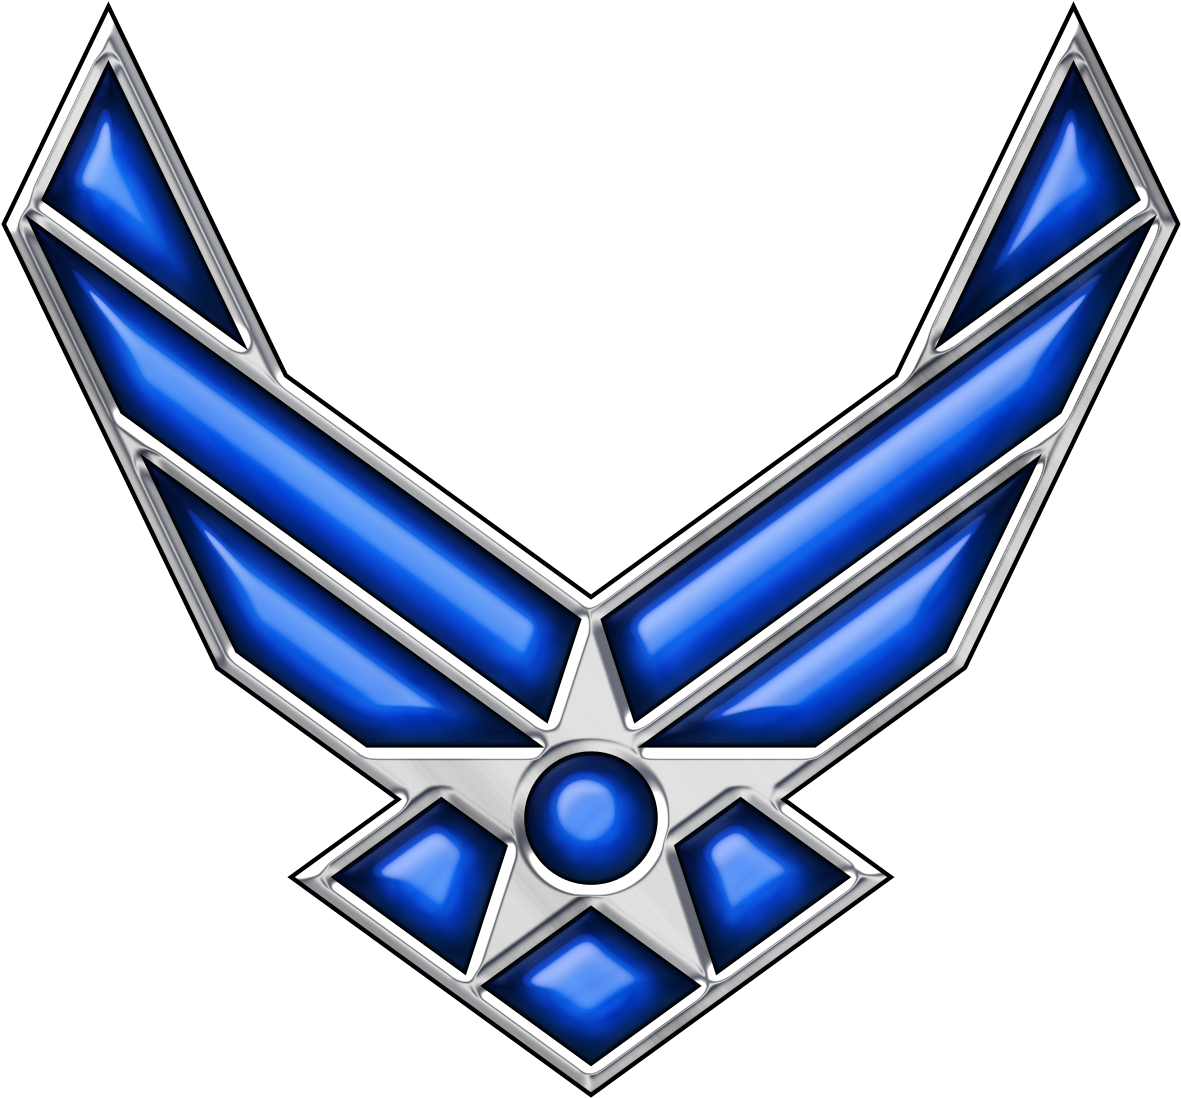 High Resolution Air Force Logo Png Icon Image - Air Force Logo Png (1243x1155)